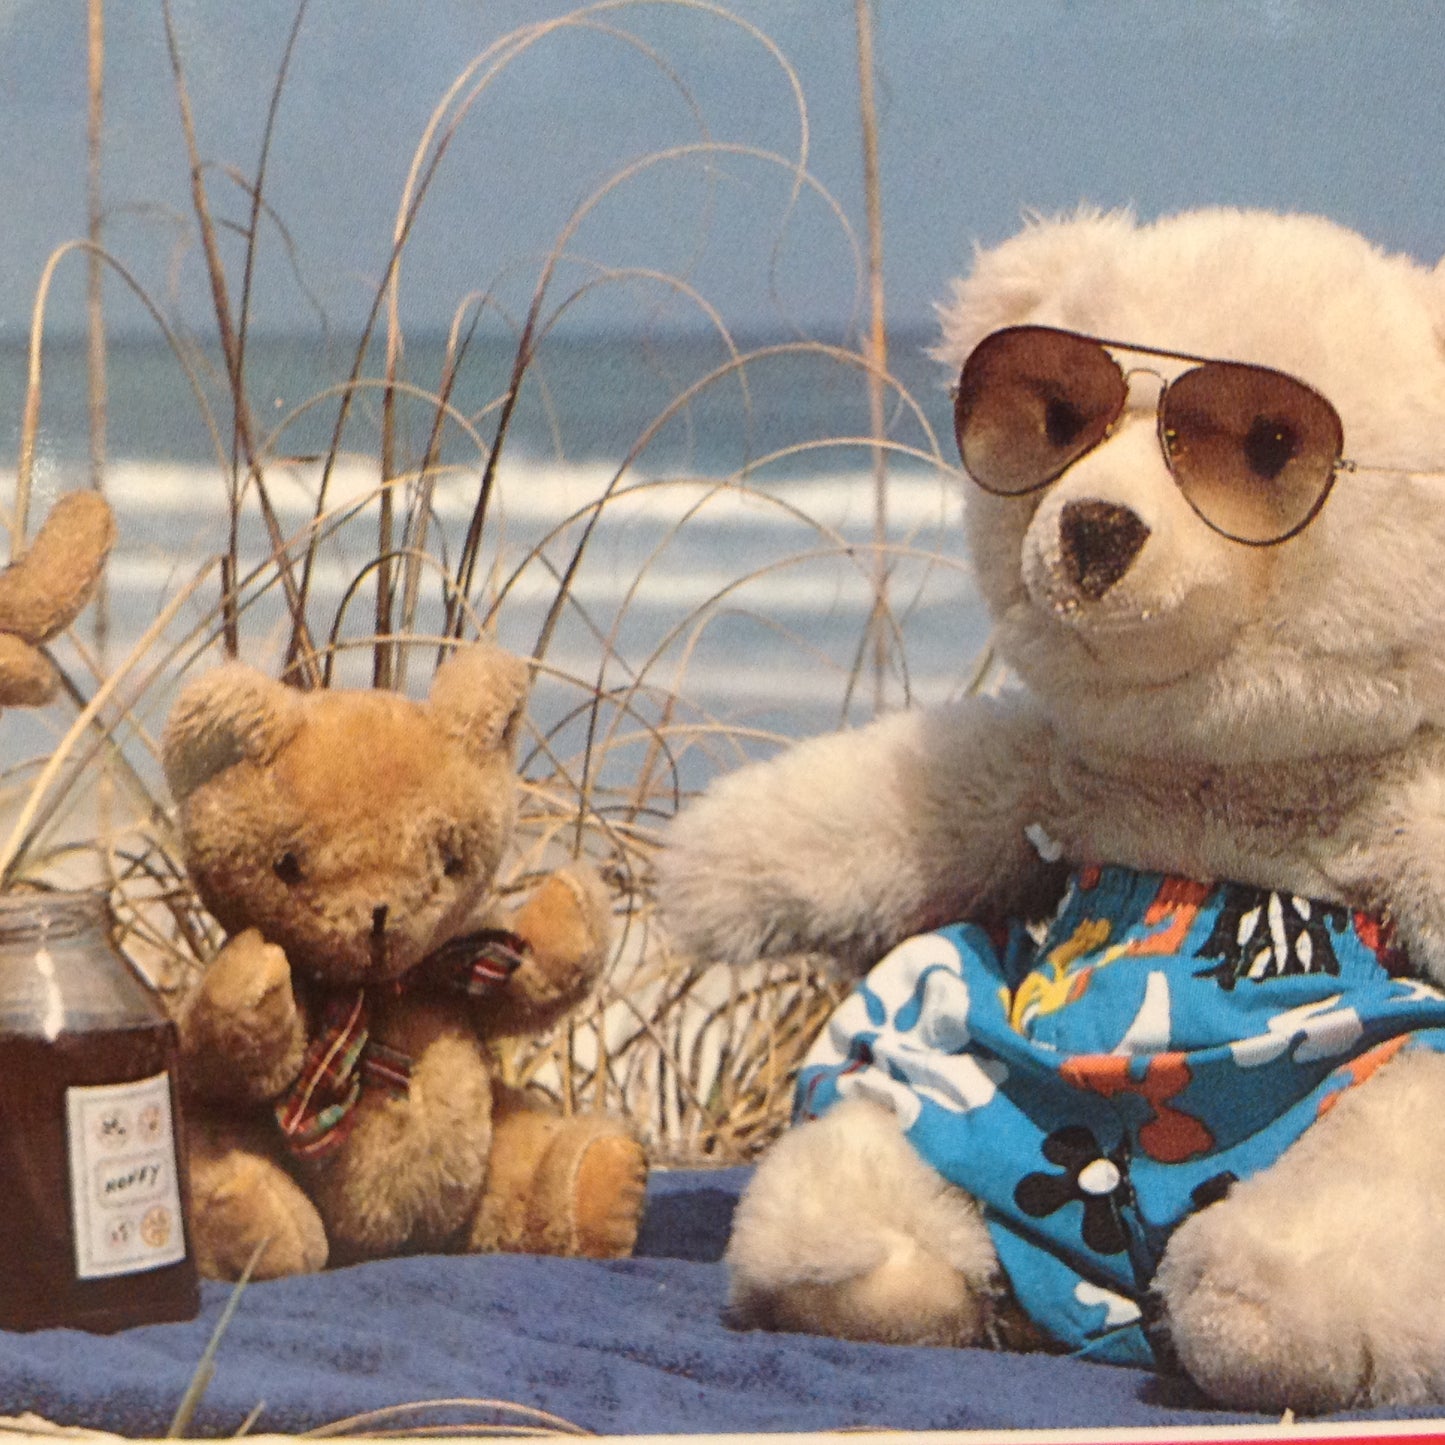 Vintage Color Postcard Gulf Shores Alabama is Great But We Miss You Teddy Bear Beach Party